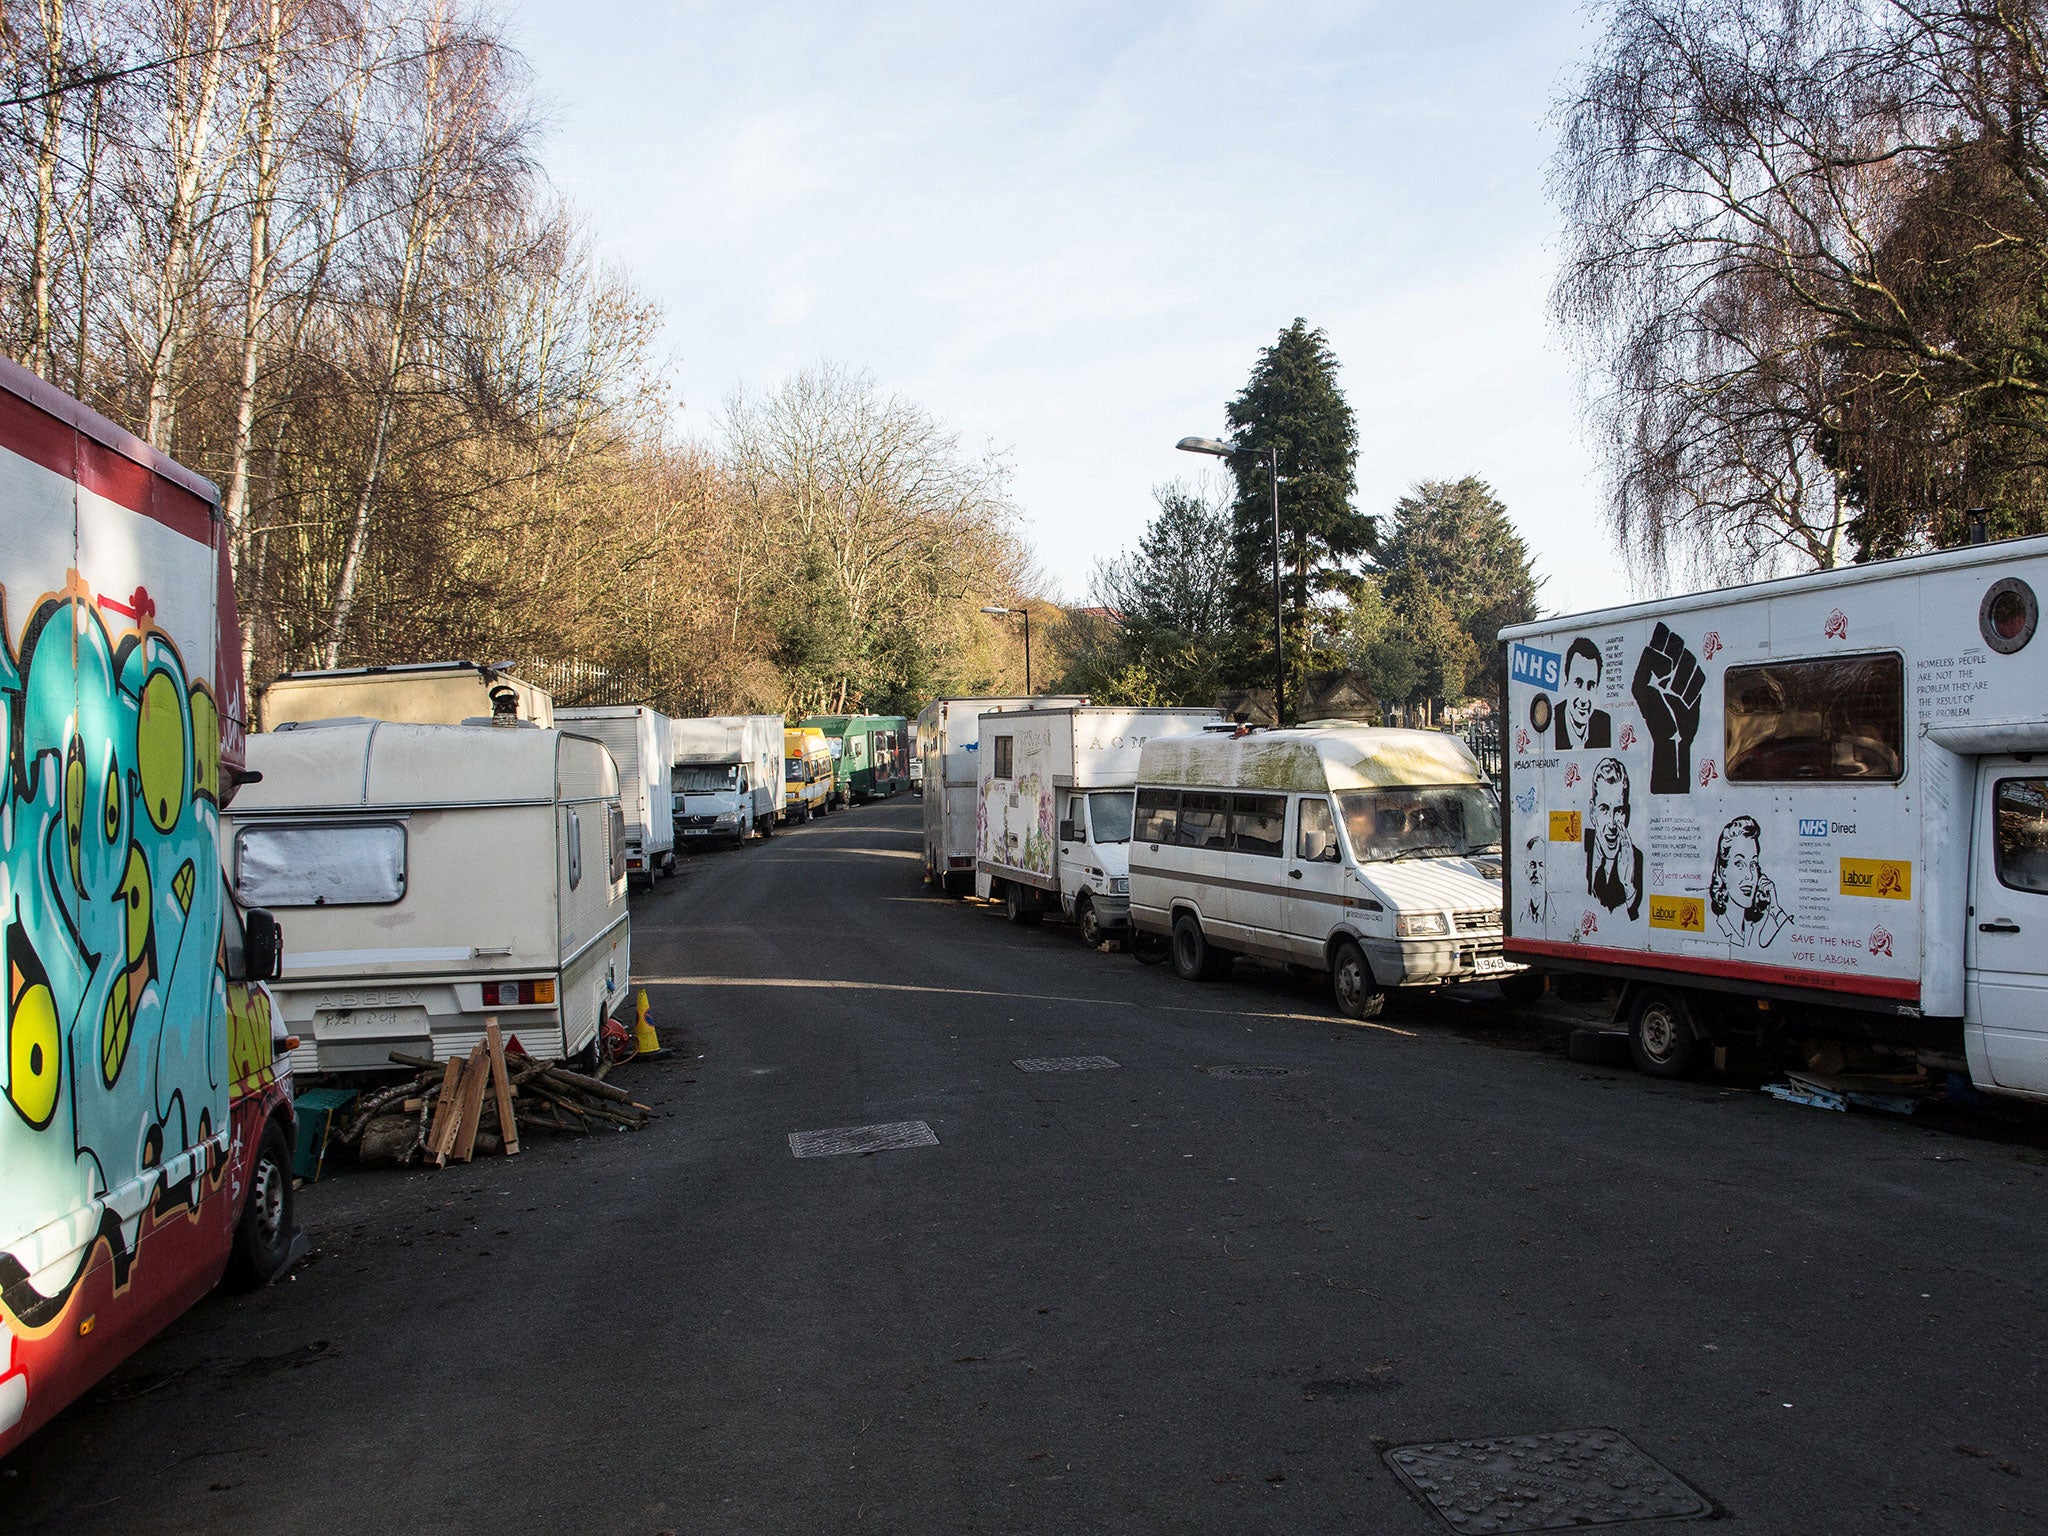 Around 50 caravans, horseboxes, motorhomes and lorries are parked on Greenbank View, close to a cemetery in Easton